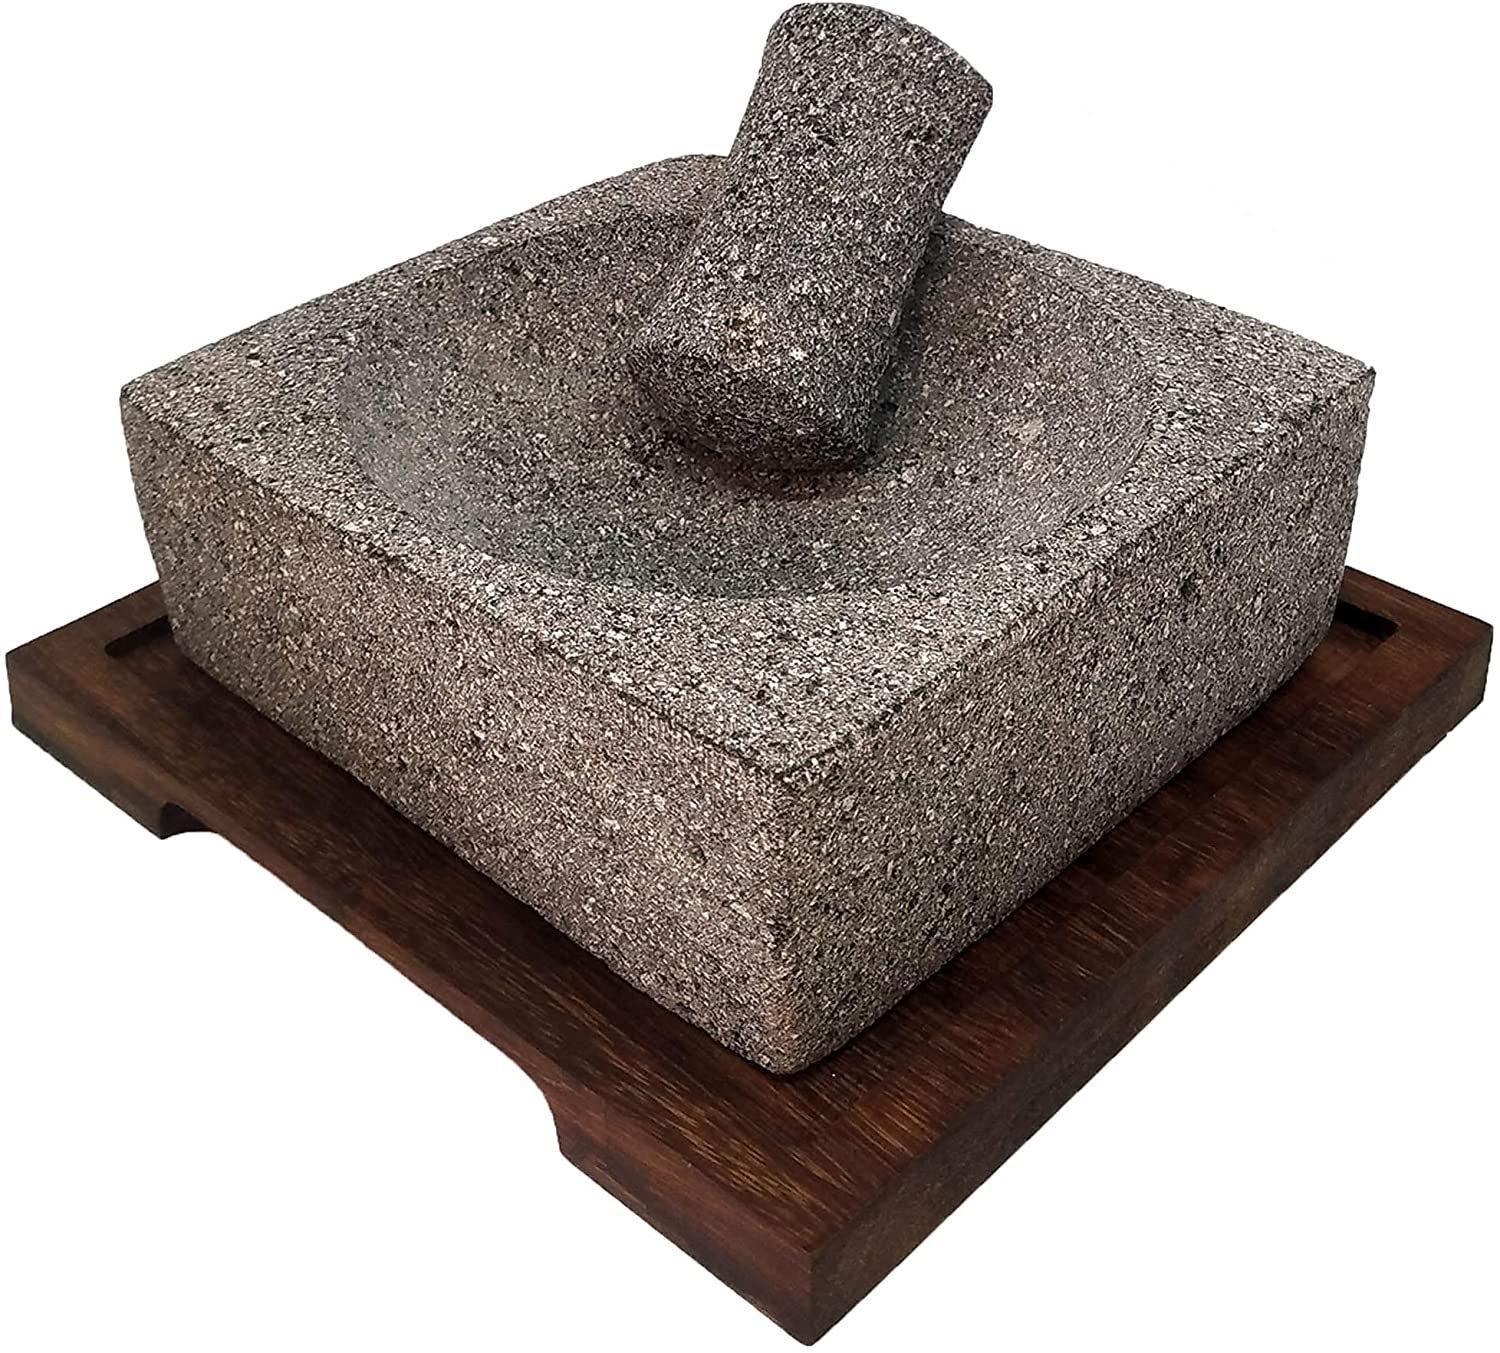 VOLCANIC ROCK PRODUCTS / 8'' Square Mortar and Pestle Set with Parota Wood Serving Board